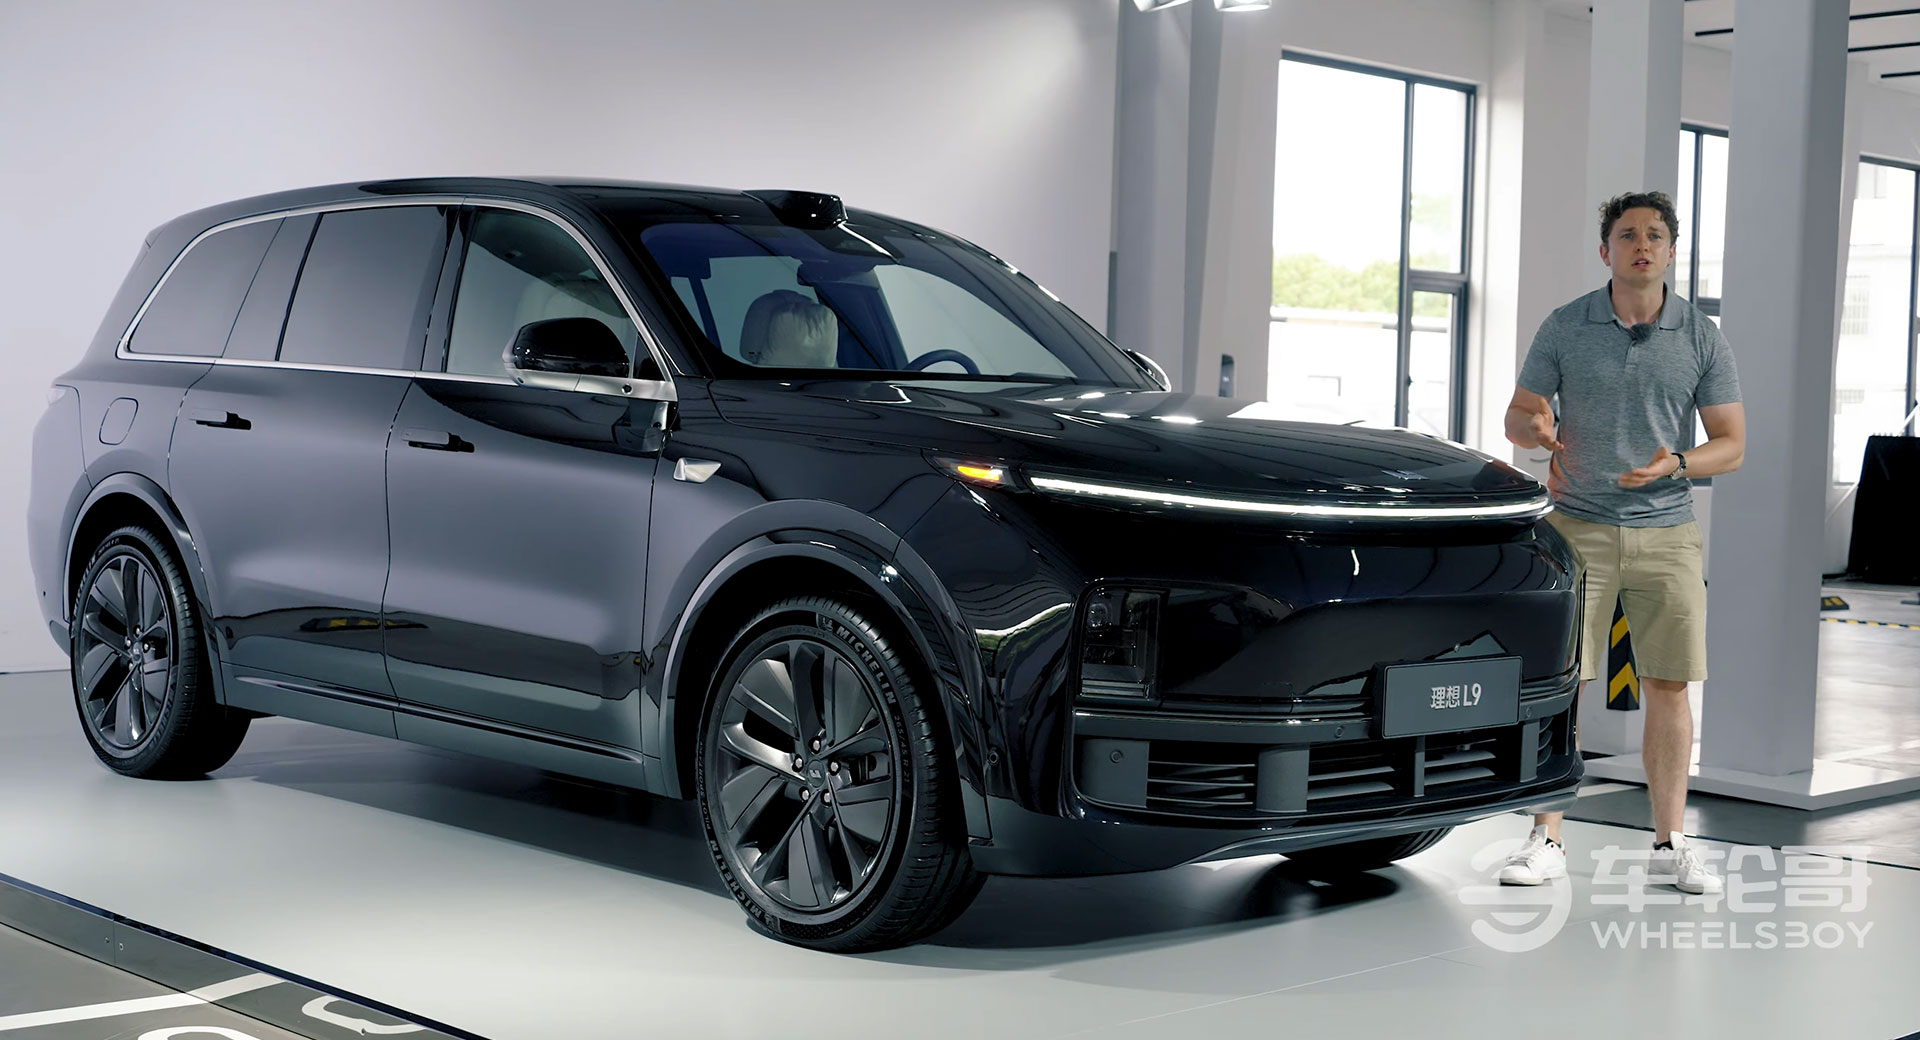 The L9 SUV From Li Auto Proves That The Chinese Really Are On A